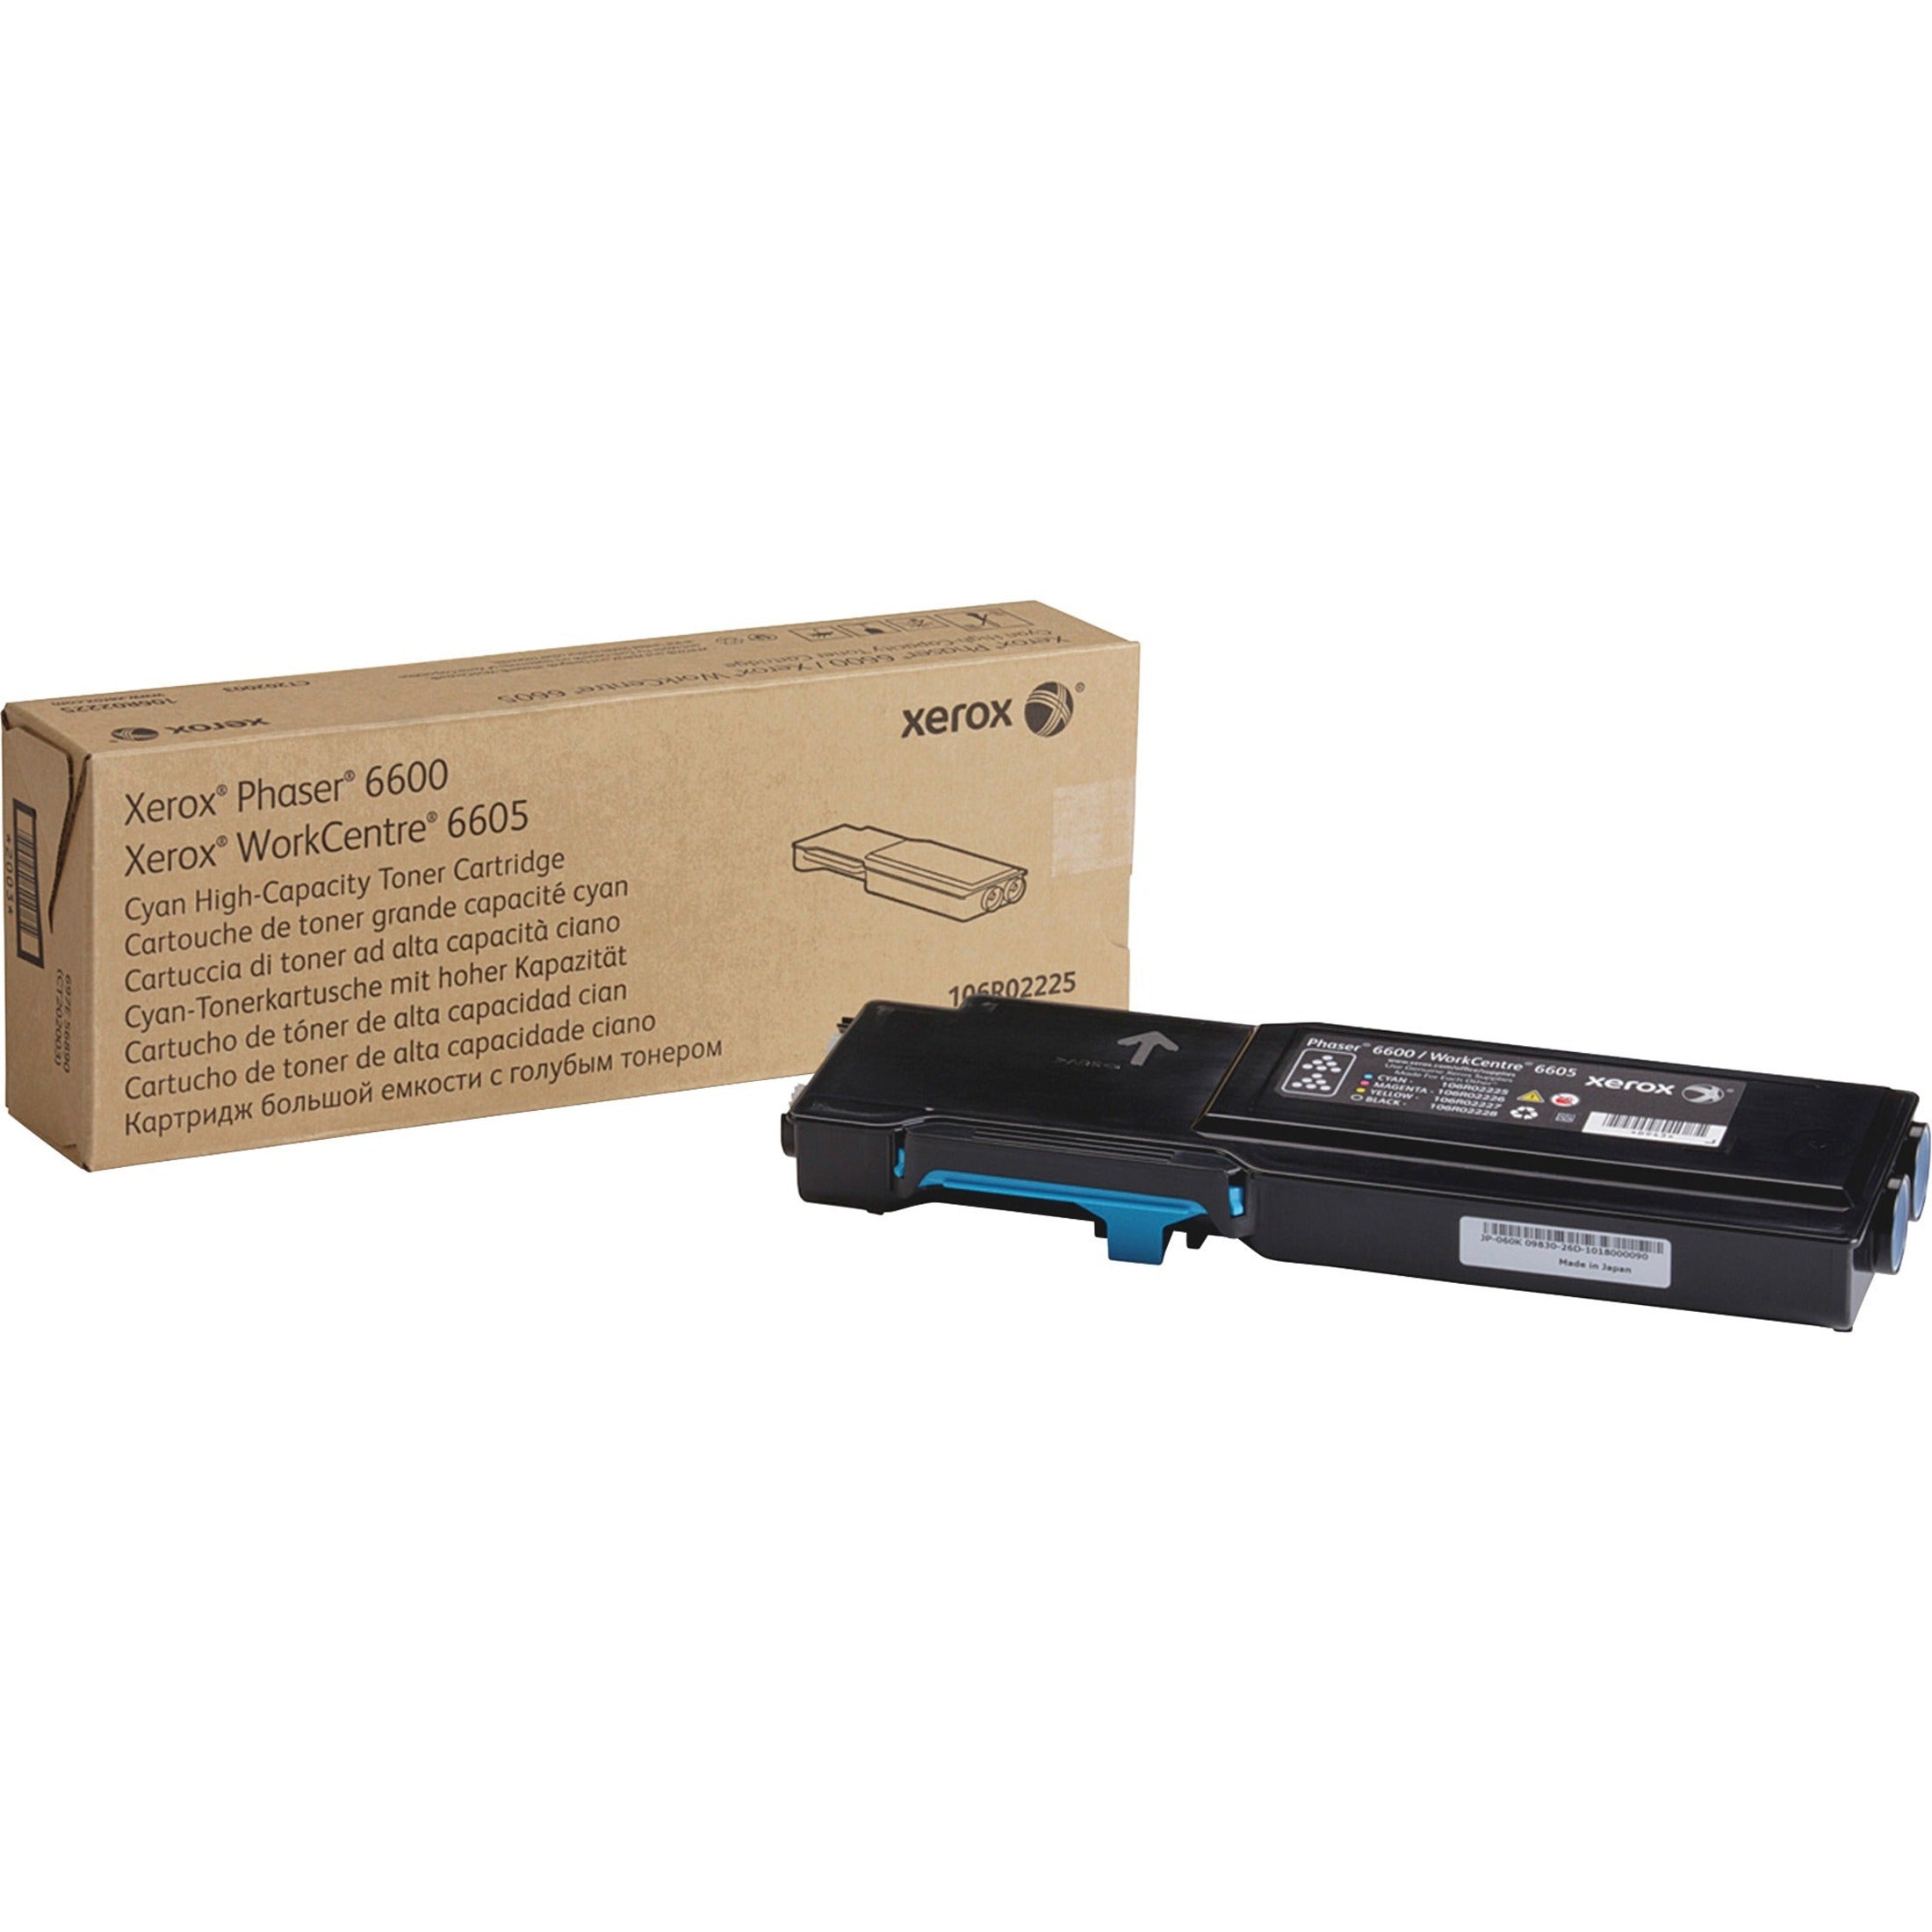 Xerox 106R02225 Phaser 6600/WorkCentre 6605 High Capacity Toner Cartridge, Cyan, 6000 Pages